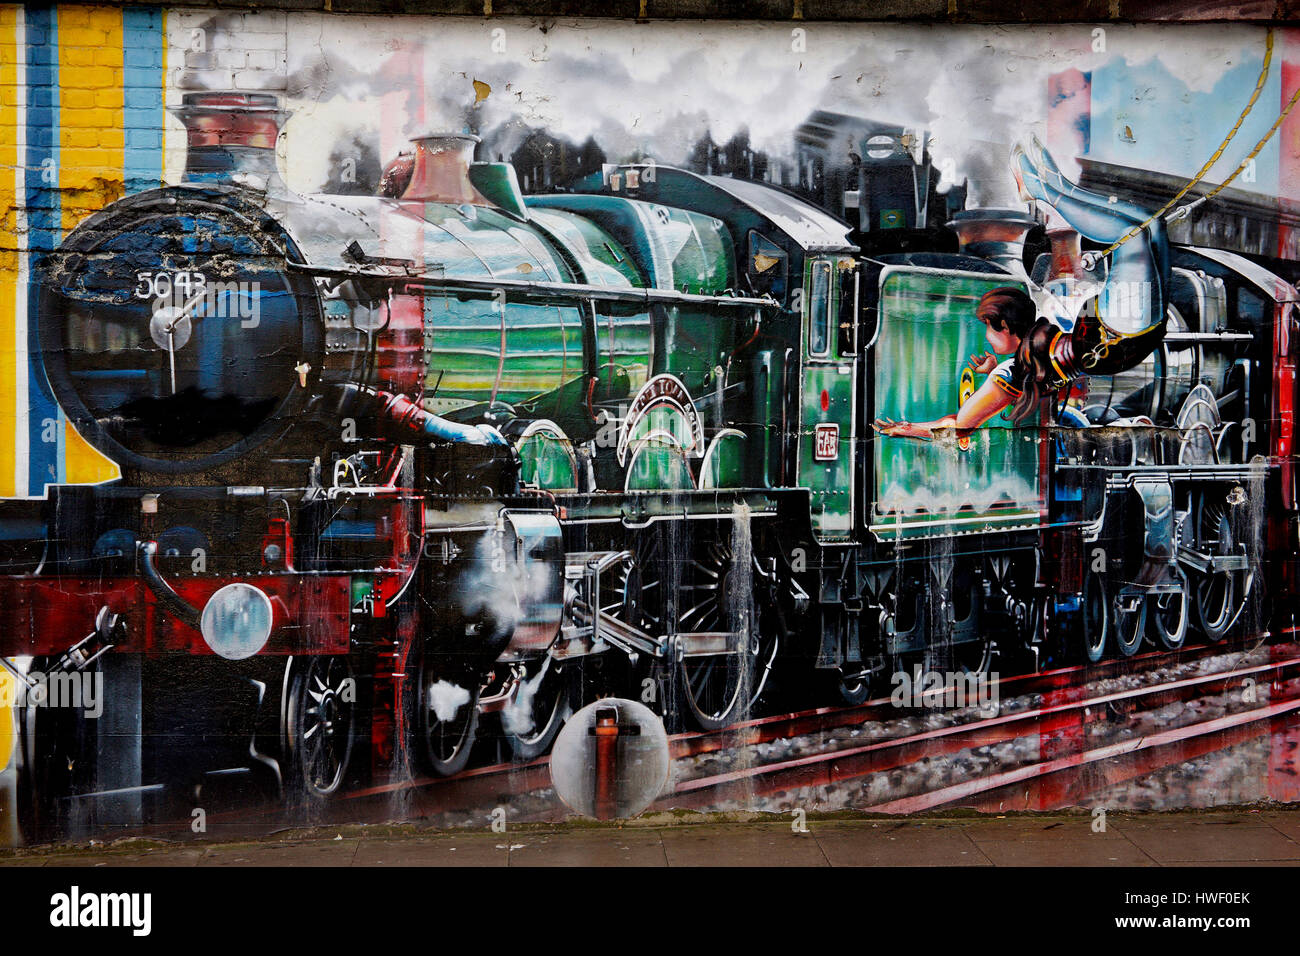 mix of graffiti images by Kobra portraying various artistic endeavors, including, acrobats and a boy reaching out to a stream train, Stock Photo